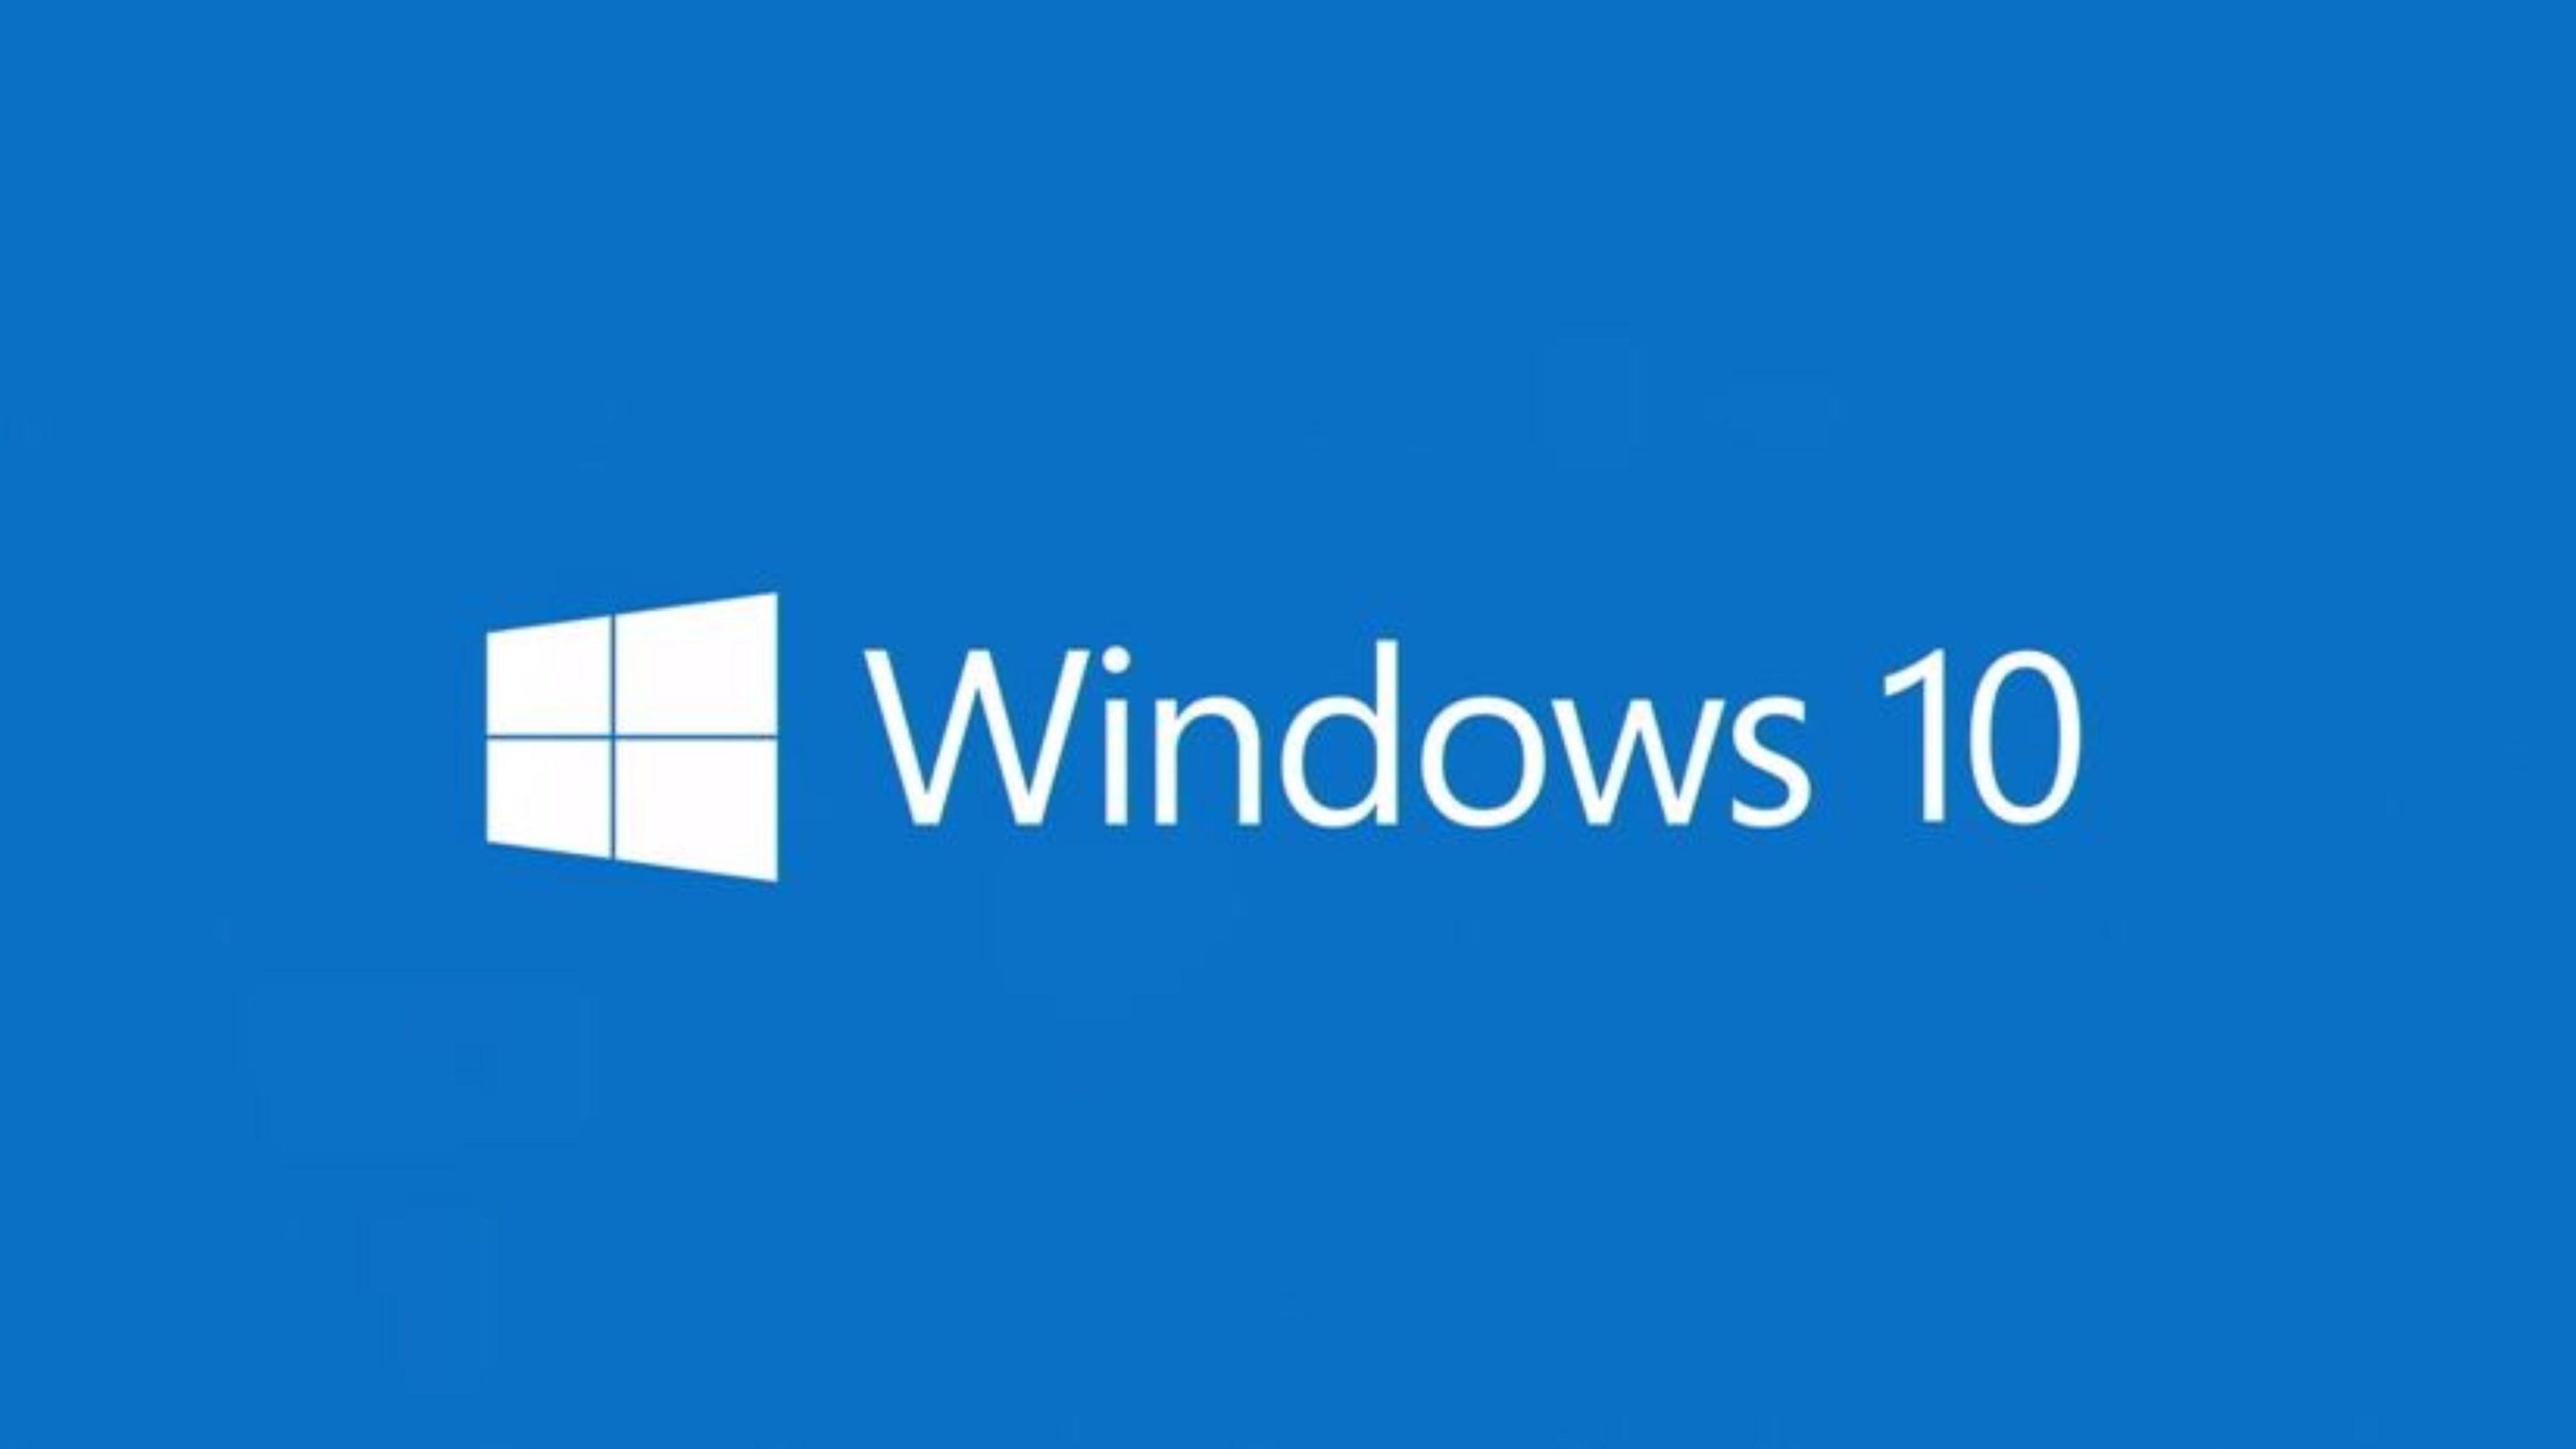 Network issues caused by windows 10 upgrade